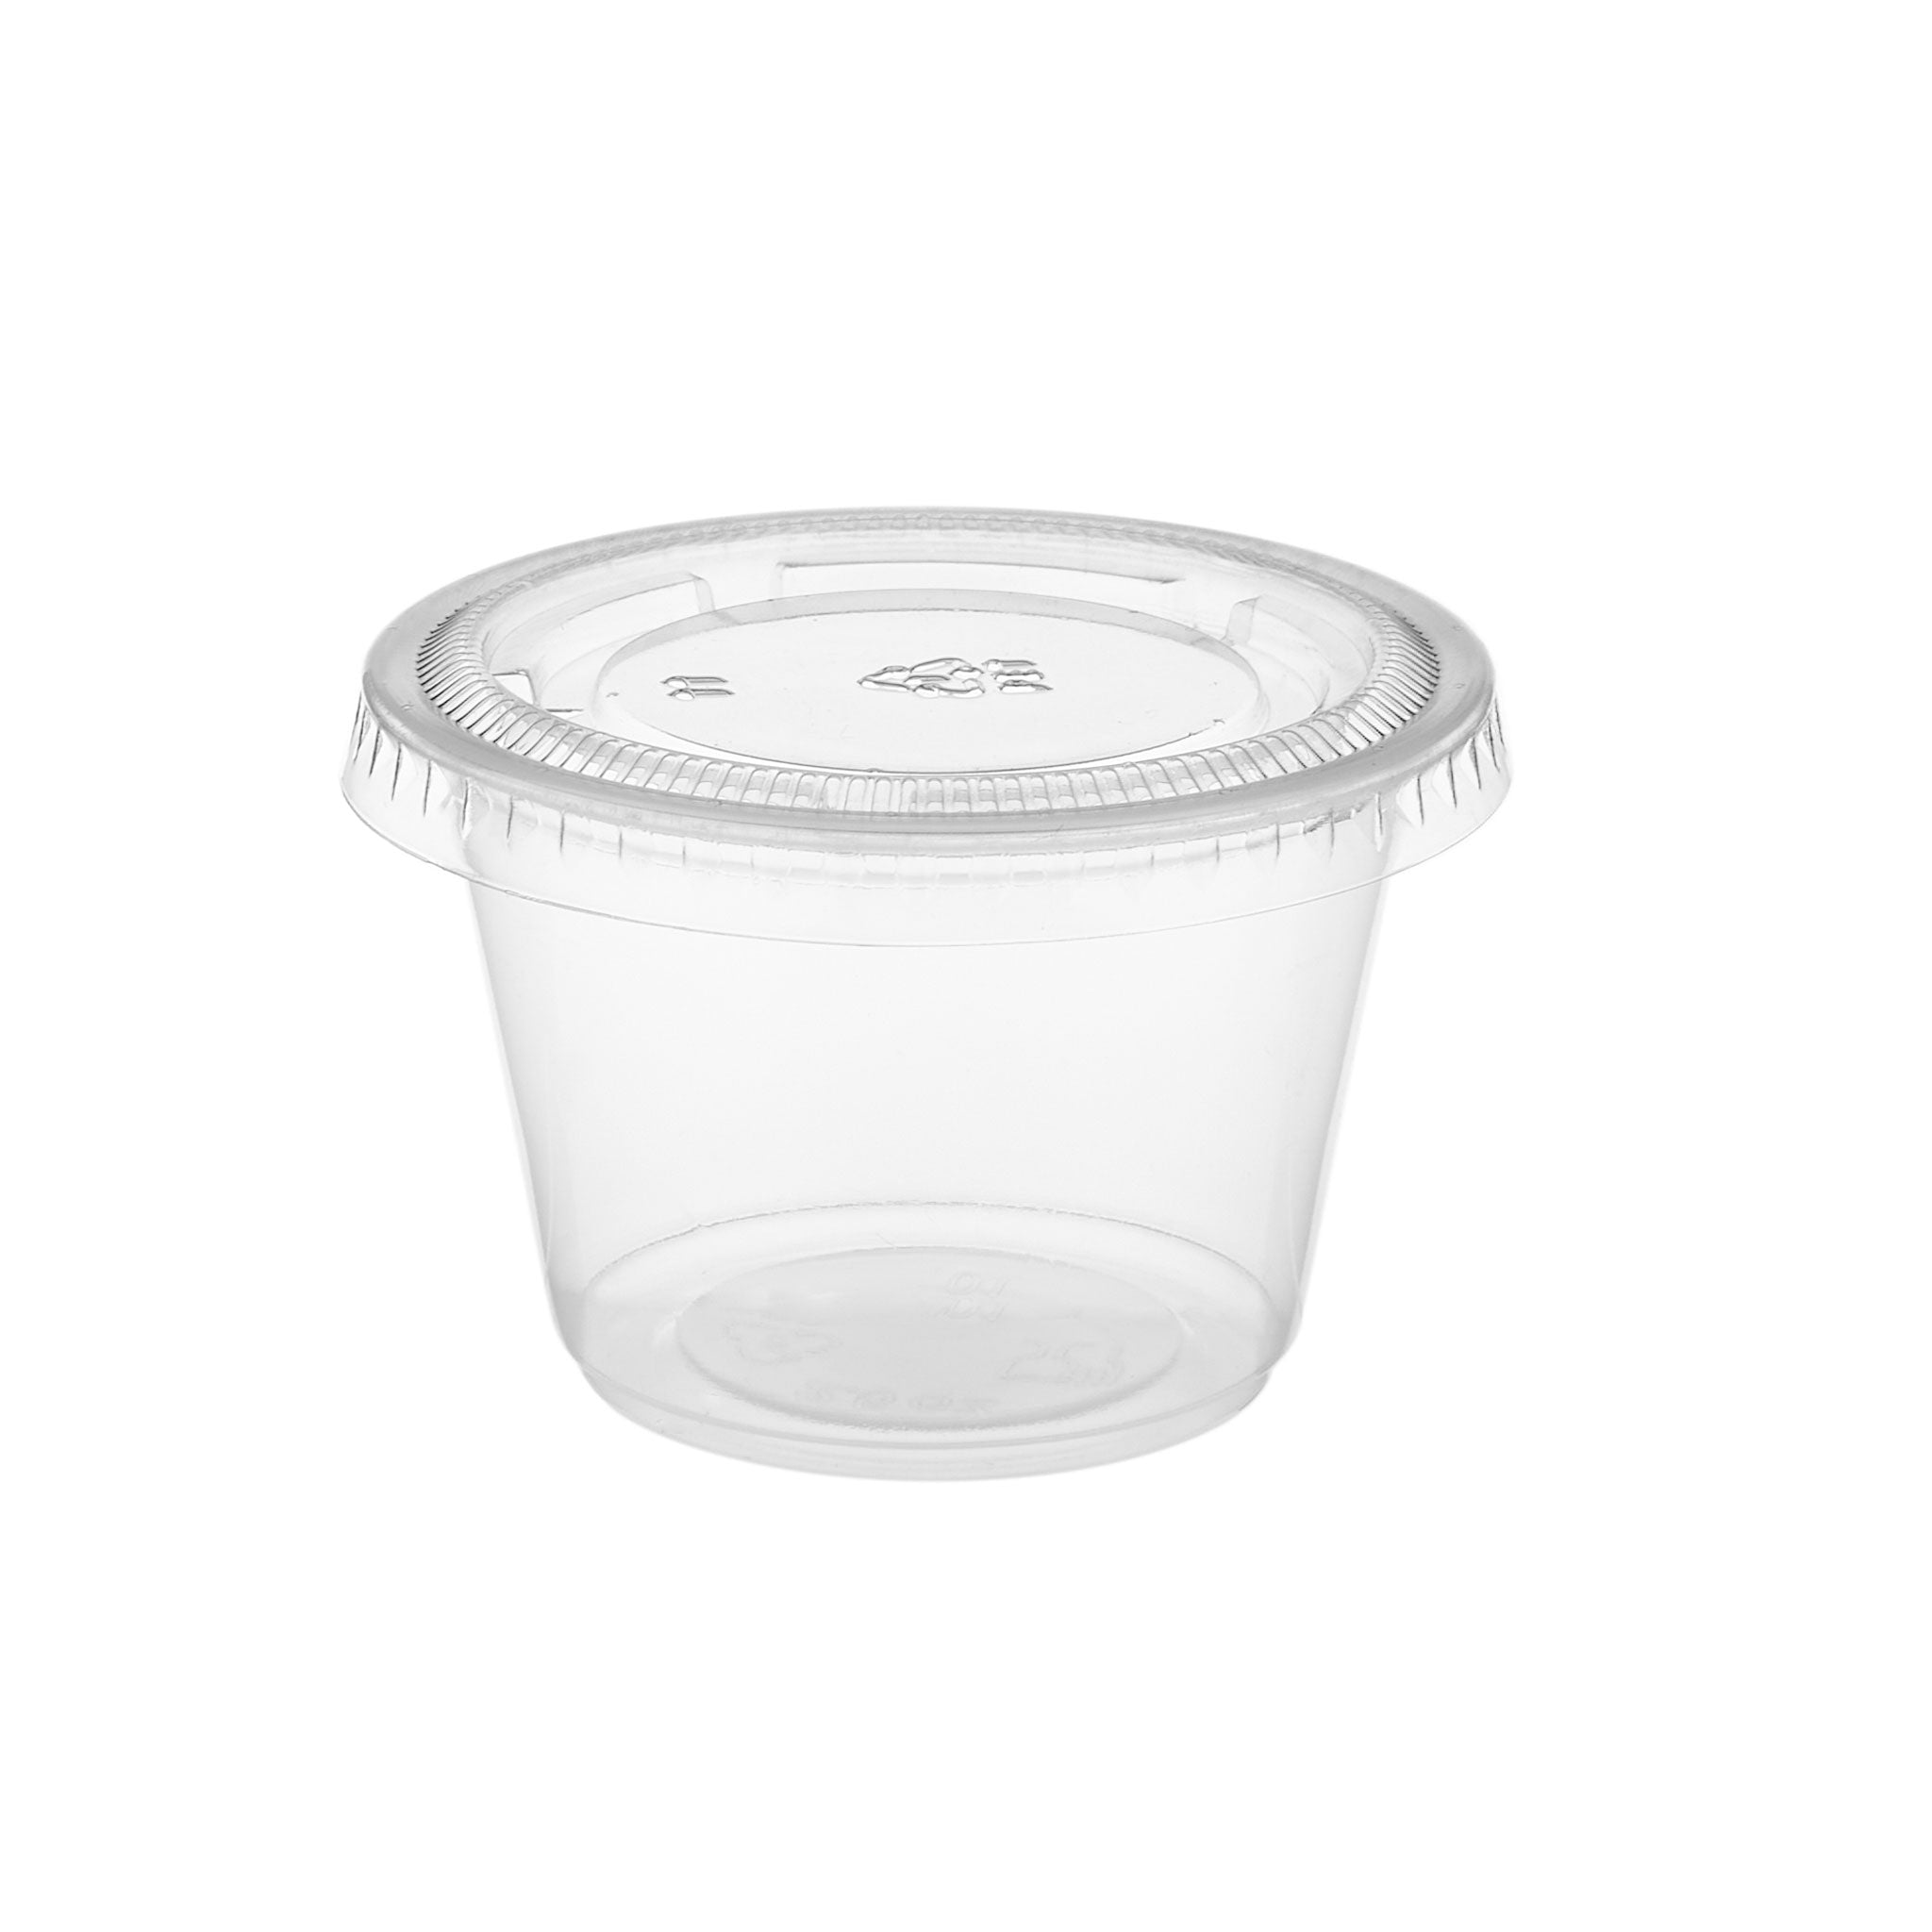 2.5 Oz Clear Portion Cup 2500 Pieces - Hotpack Oman